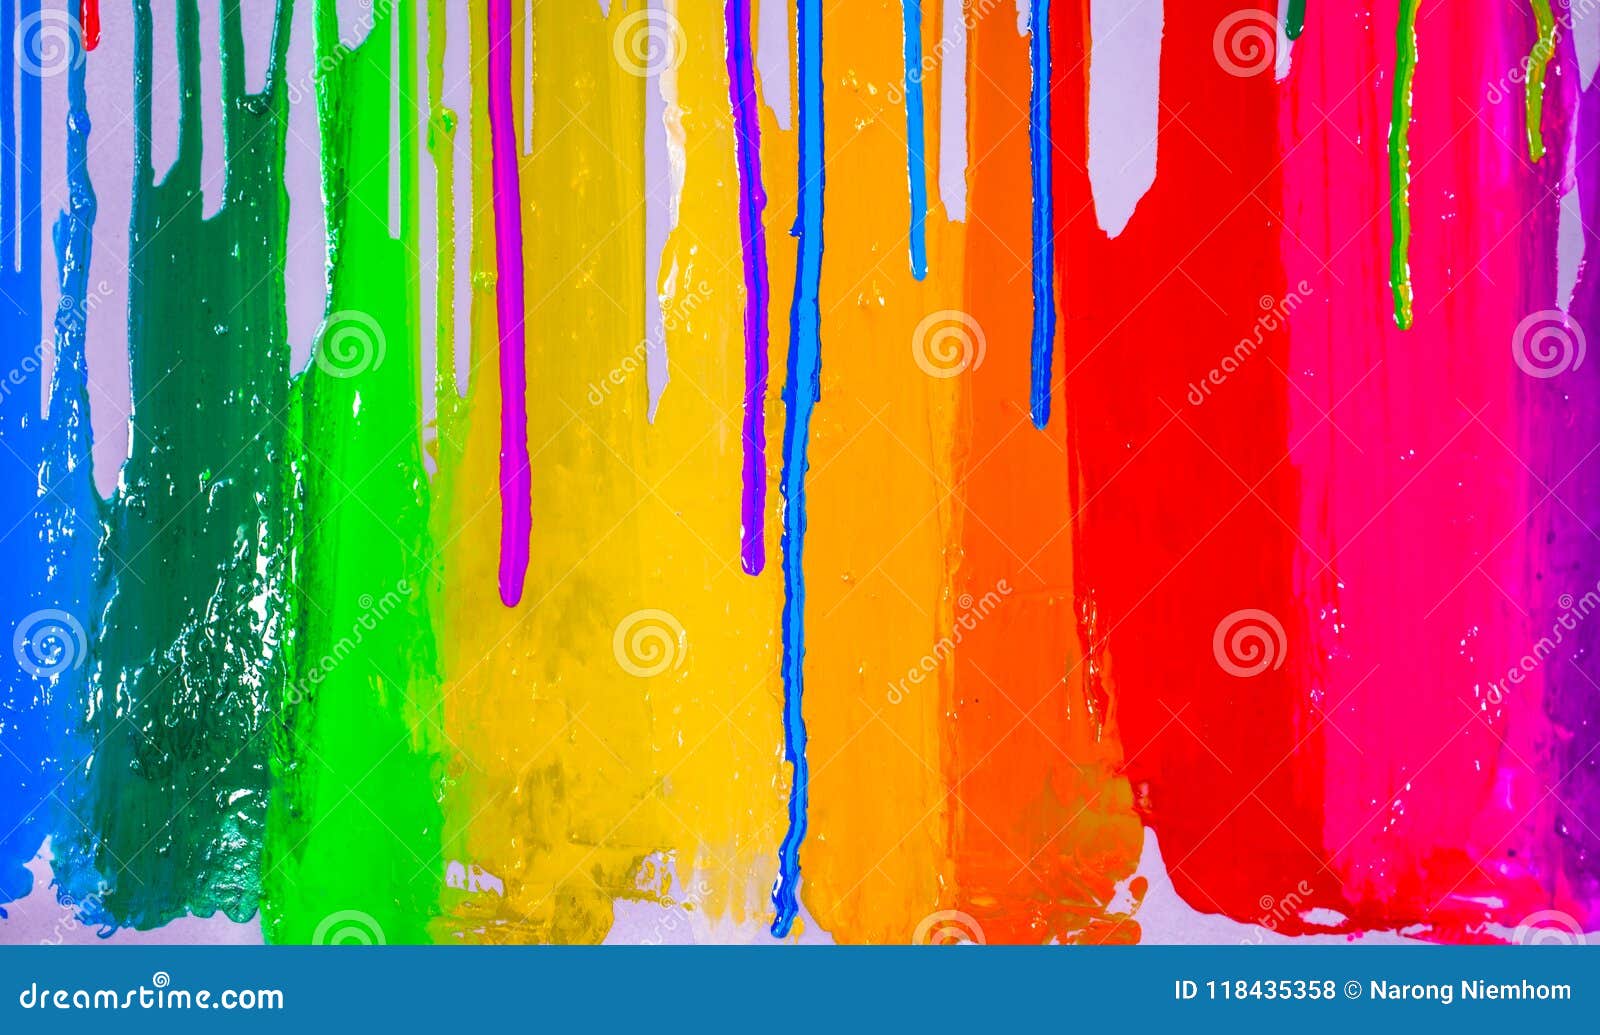 Dripping colors stock photo. Image of clipping, dripping - 118435358